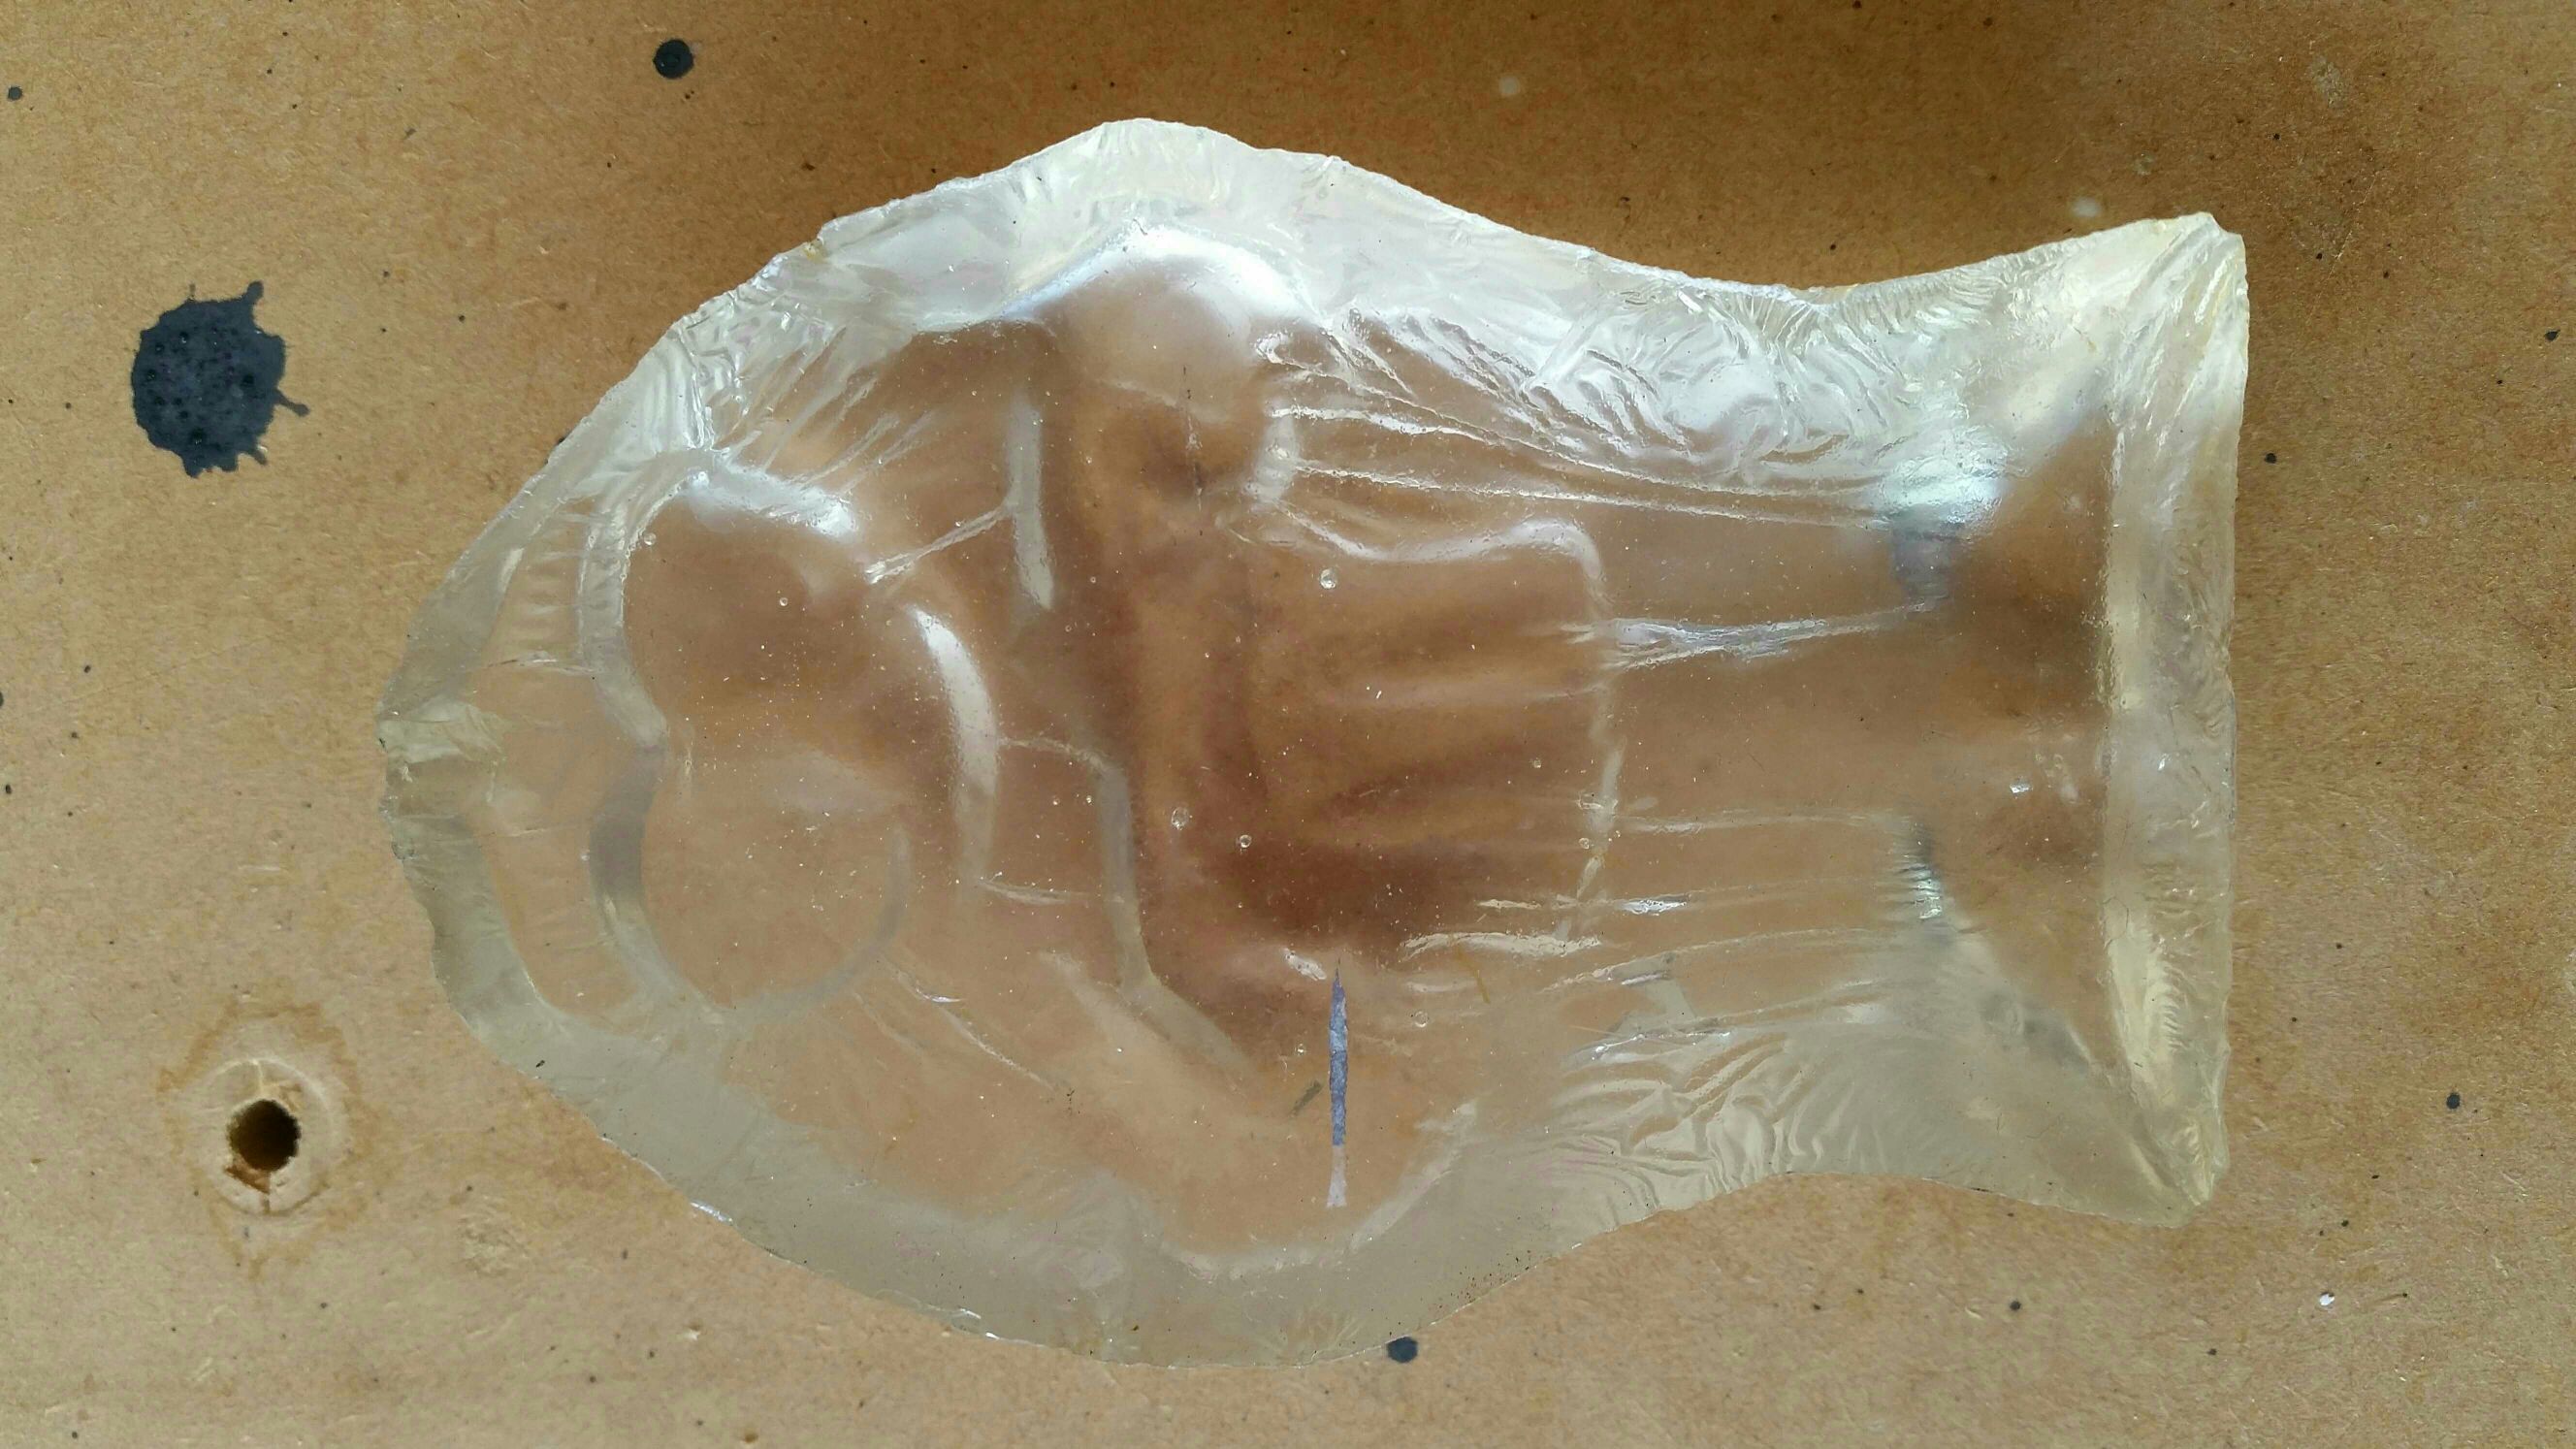 Clear Resin Casting - Possible At Home and Without Pressure Pot?